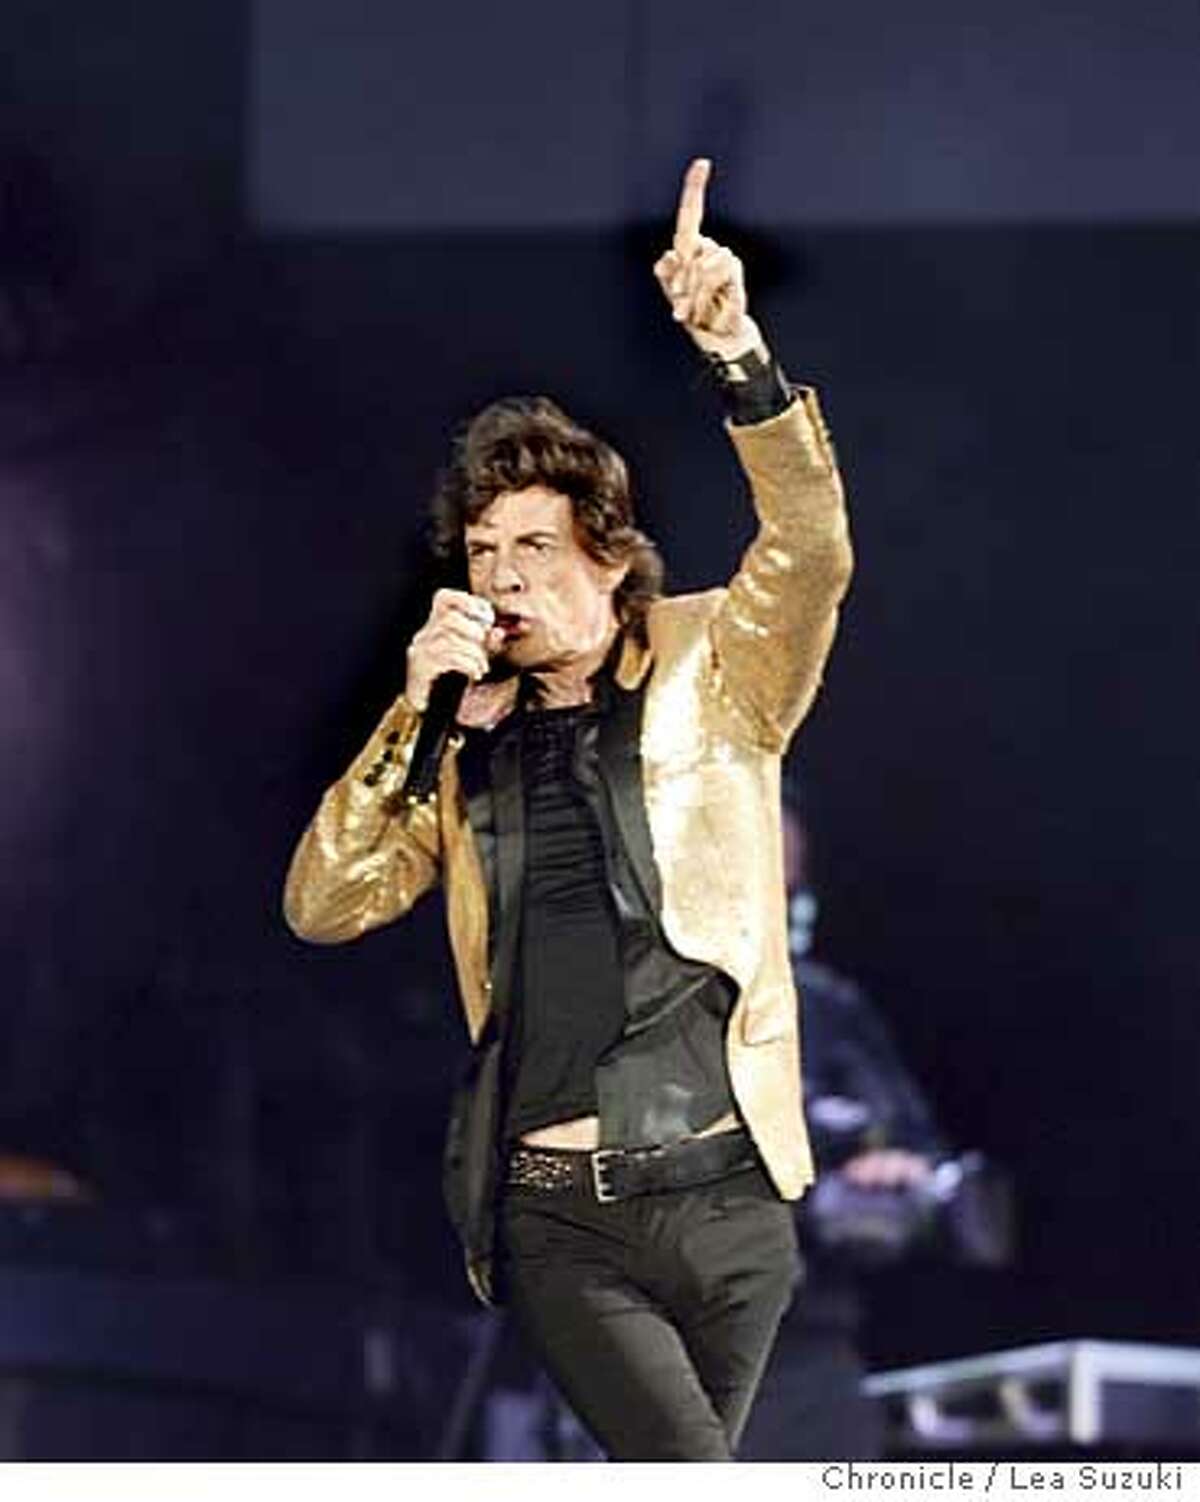 Rolling Stones perform at SBC. Two song limit - one from 70 feet back, other in pit. Ticket Pick-Up (1 ticket) ROLLING STONES "A BIGGER BANG WORLD TOUR" Sunday, November 13, 2005 San Francisco, Calif. SBC Park Meeting Times: 5:30 pm to see opening act, Everclear 6:15pm to see opening act, Metallica 8:00pm for the Stones Location: Corner of 2nd and King Street, Side closest to the venue, under large South Beach Harbor sign Photo taken on 11/13/05 in San Francisco, CA. Photo by Lea Suzuki/ The San Francisco Chronicle